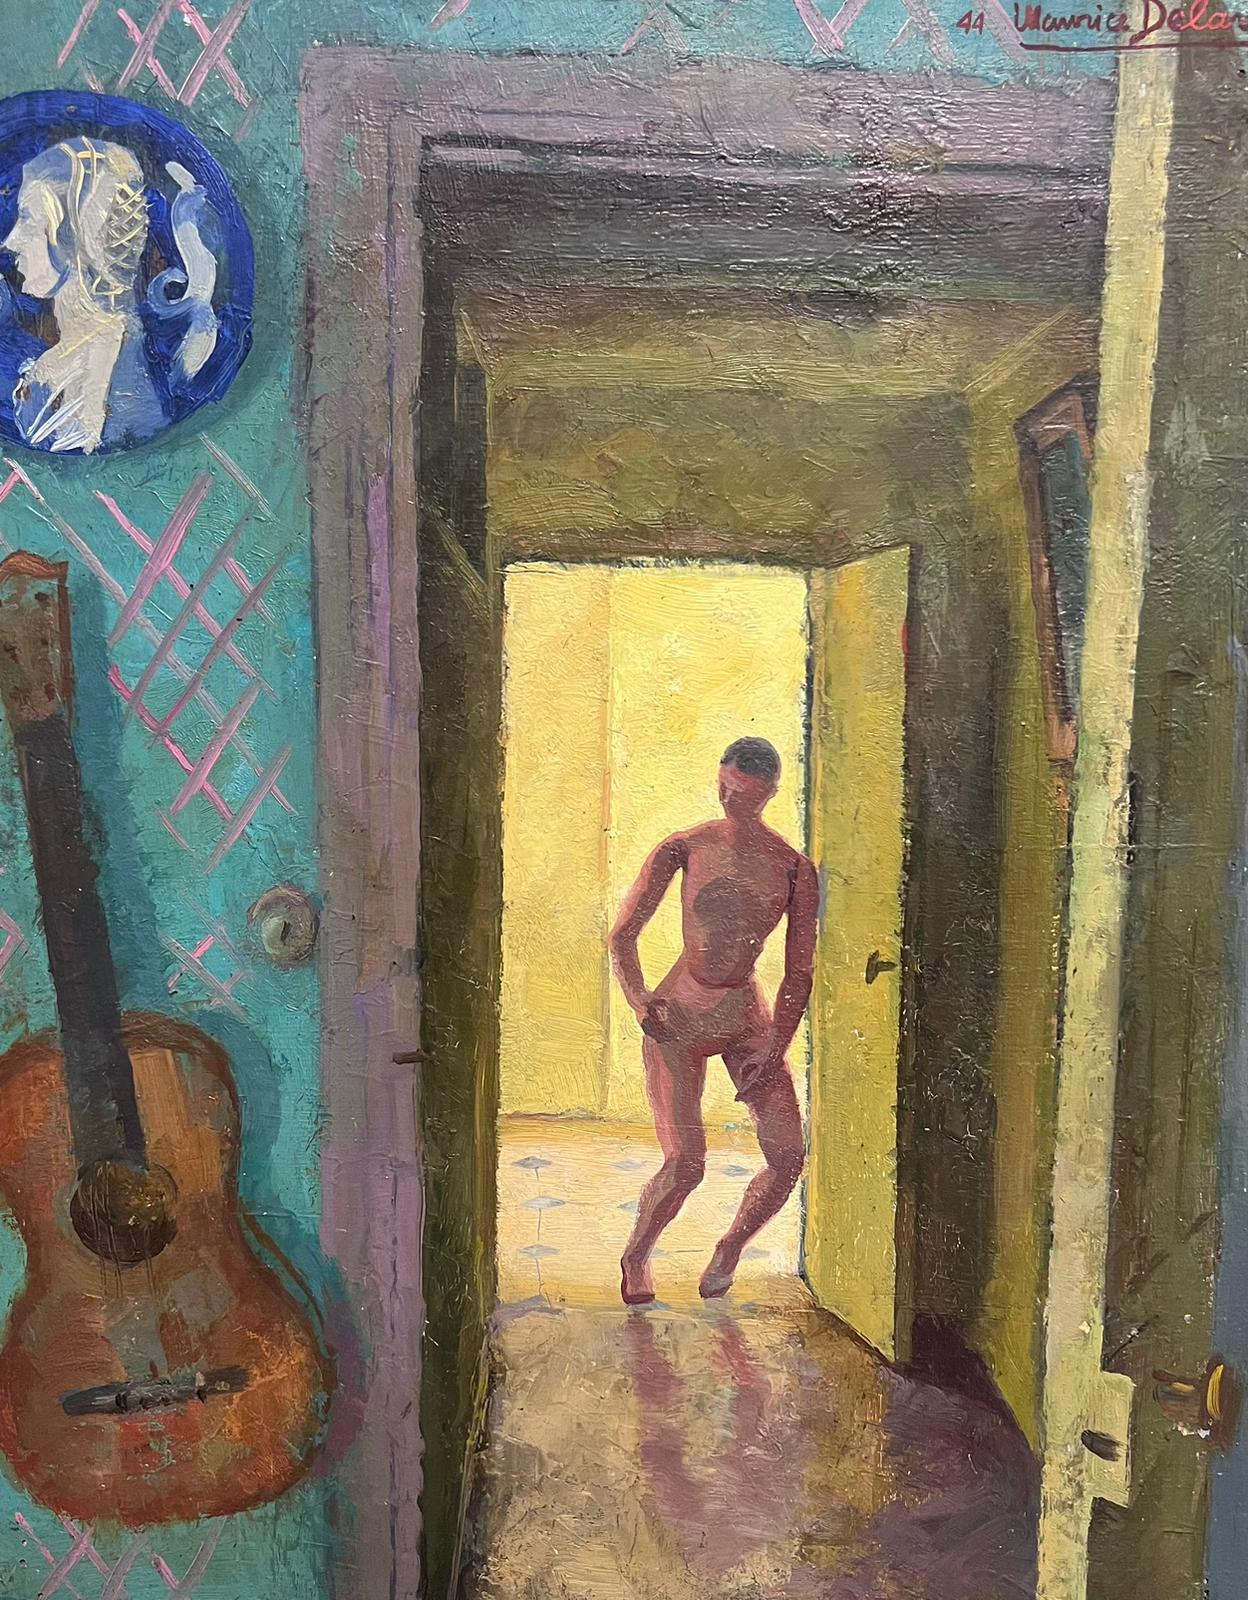 Nude in Interior
by Maurice Delavier (French mid 20th century)
signed and dated 1944
oil on board, unframed
board: 18.5 x 14.5 inches
inscribed verso
provenance: private collection, France
condition: overall very good and presentable. 